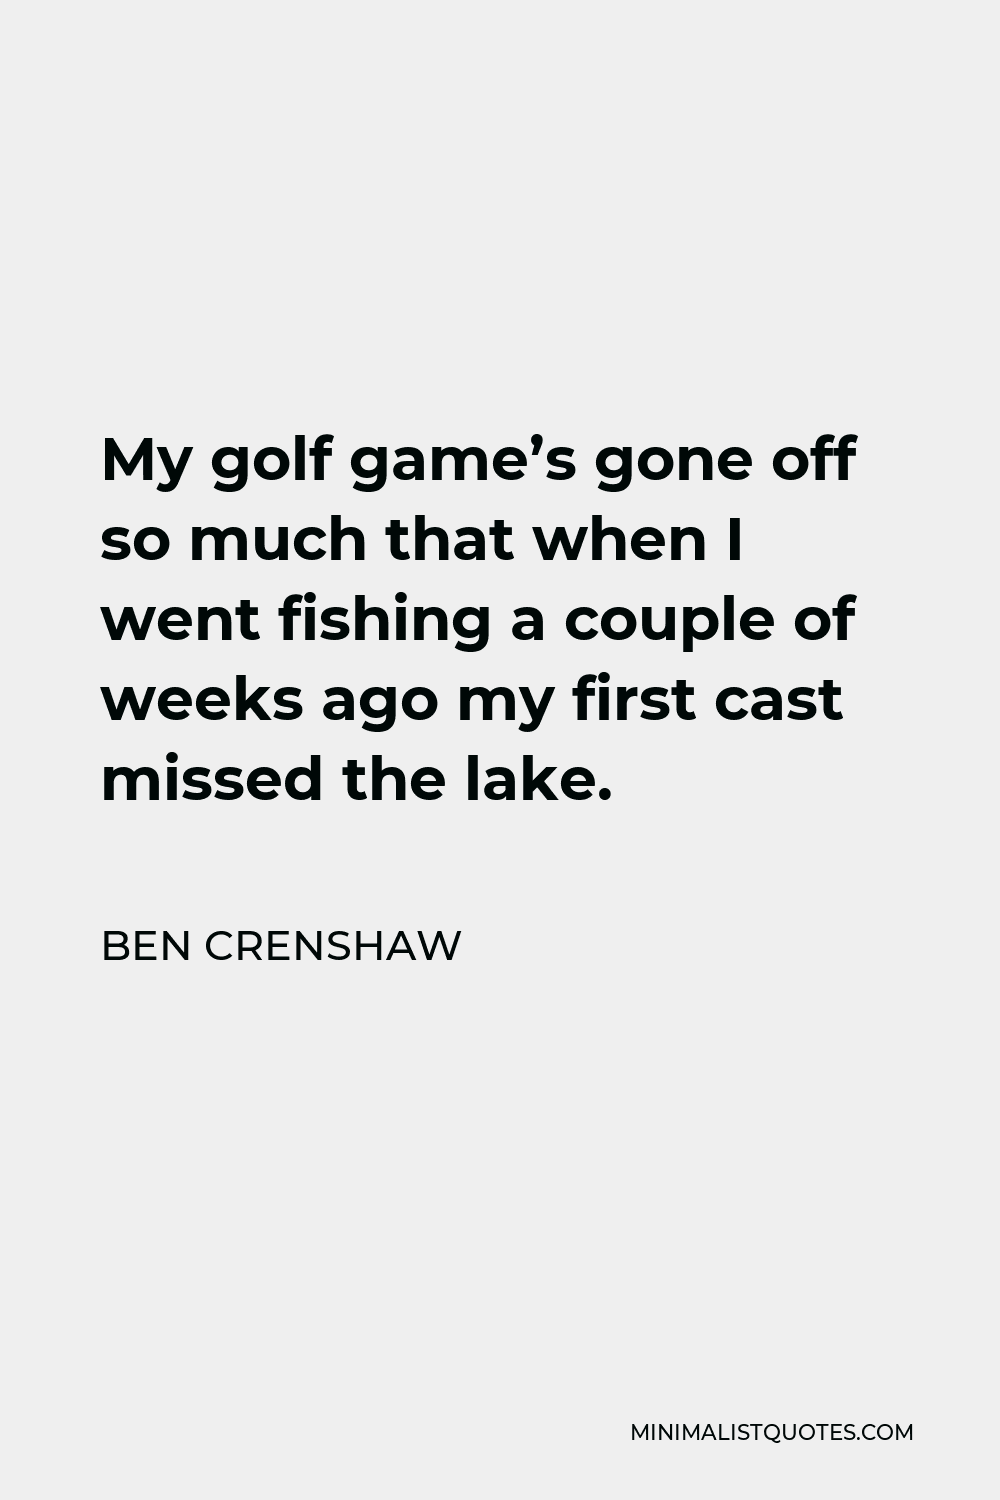 Ben Crenshaw Quote - My golf game’s gone off so much that when I went fishing a couple of weeks ago my first cast missed the lake.